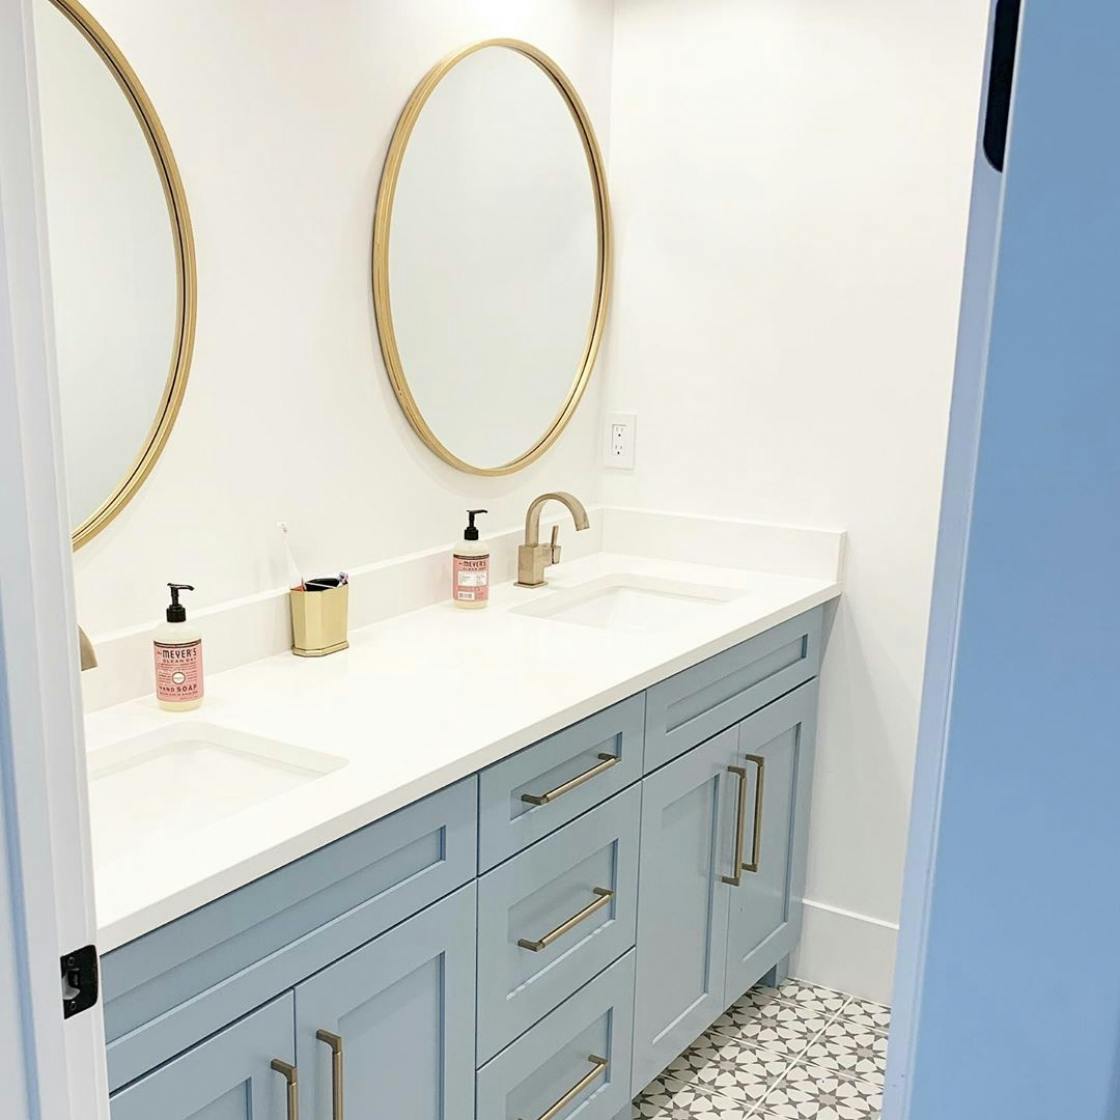 Bathroom Interior Design Trends From Instagram You Need To Try